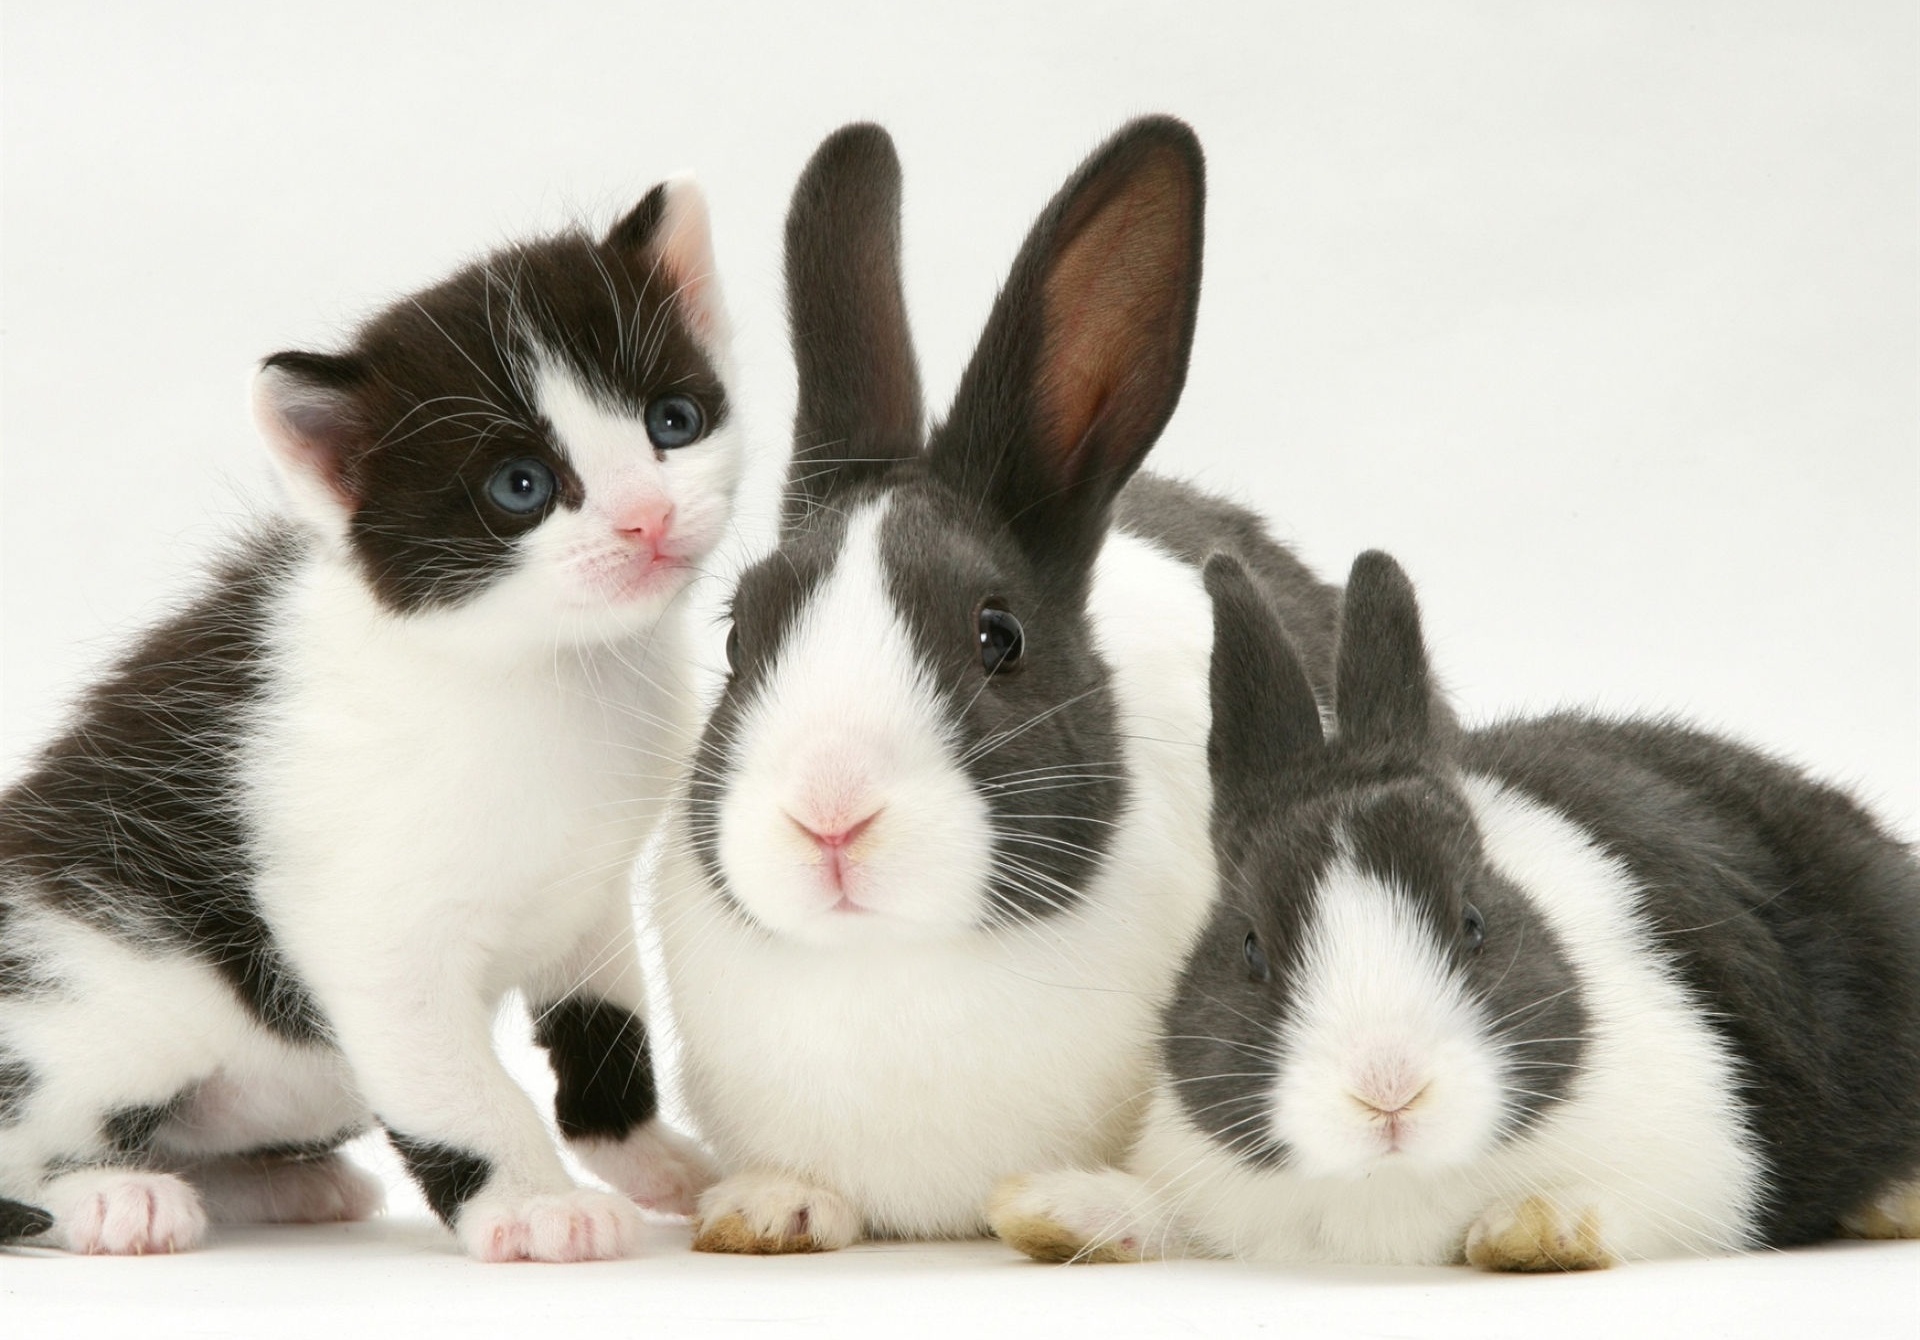 Kitten and Bunny Wallpapers - 4k, HD Kitten and Bunny Backgrounds on